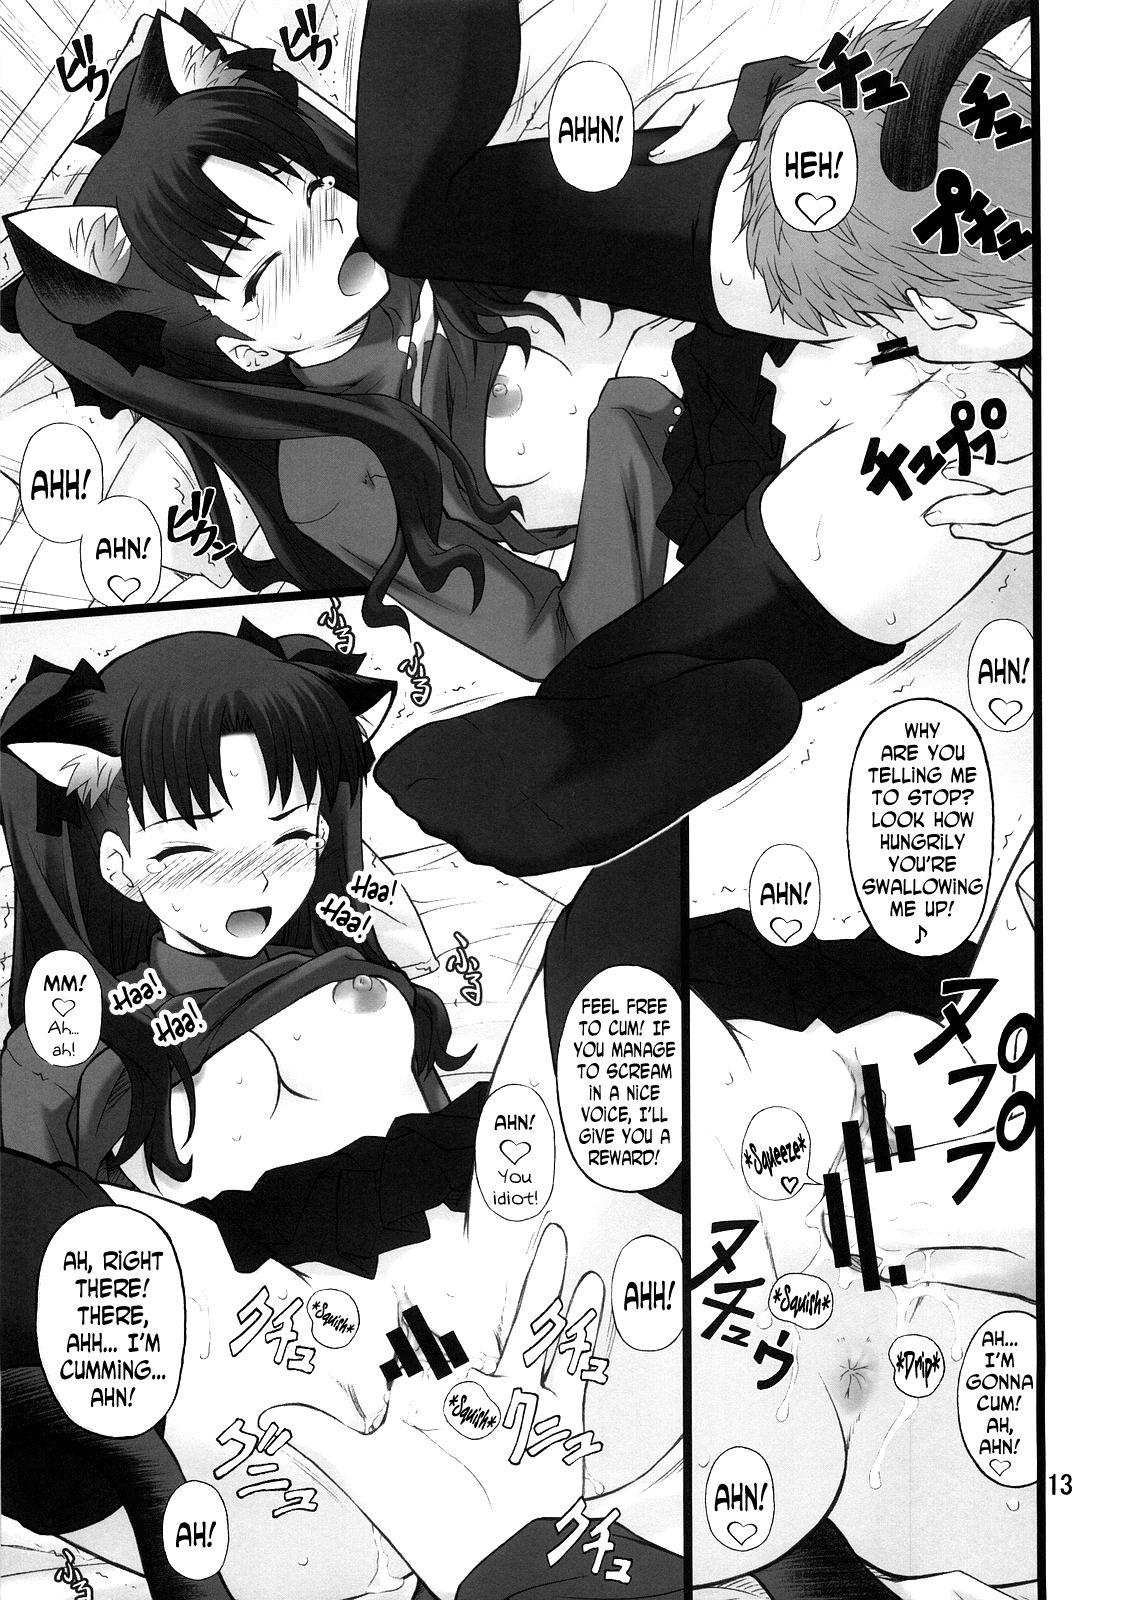 Money Grem-Rin 1 - Fate stay night Web - Page 12